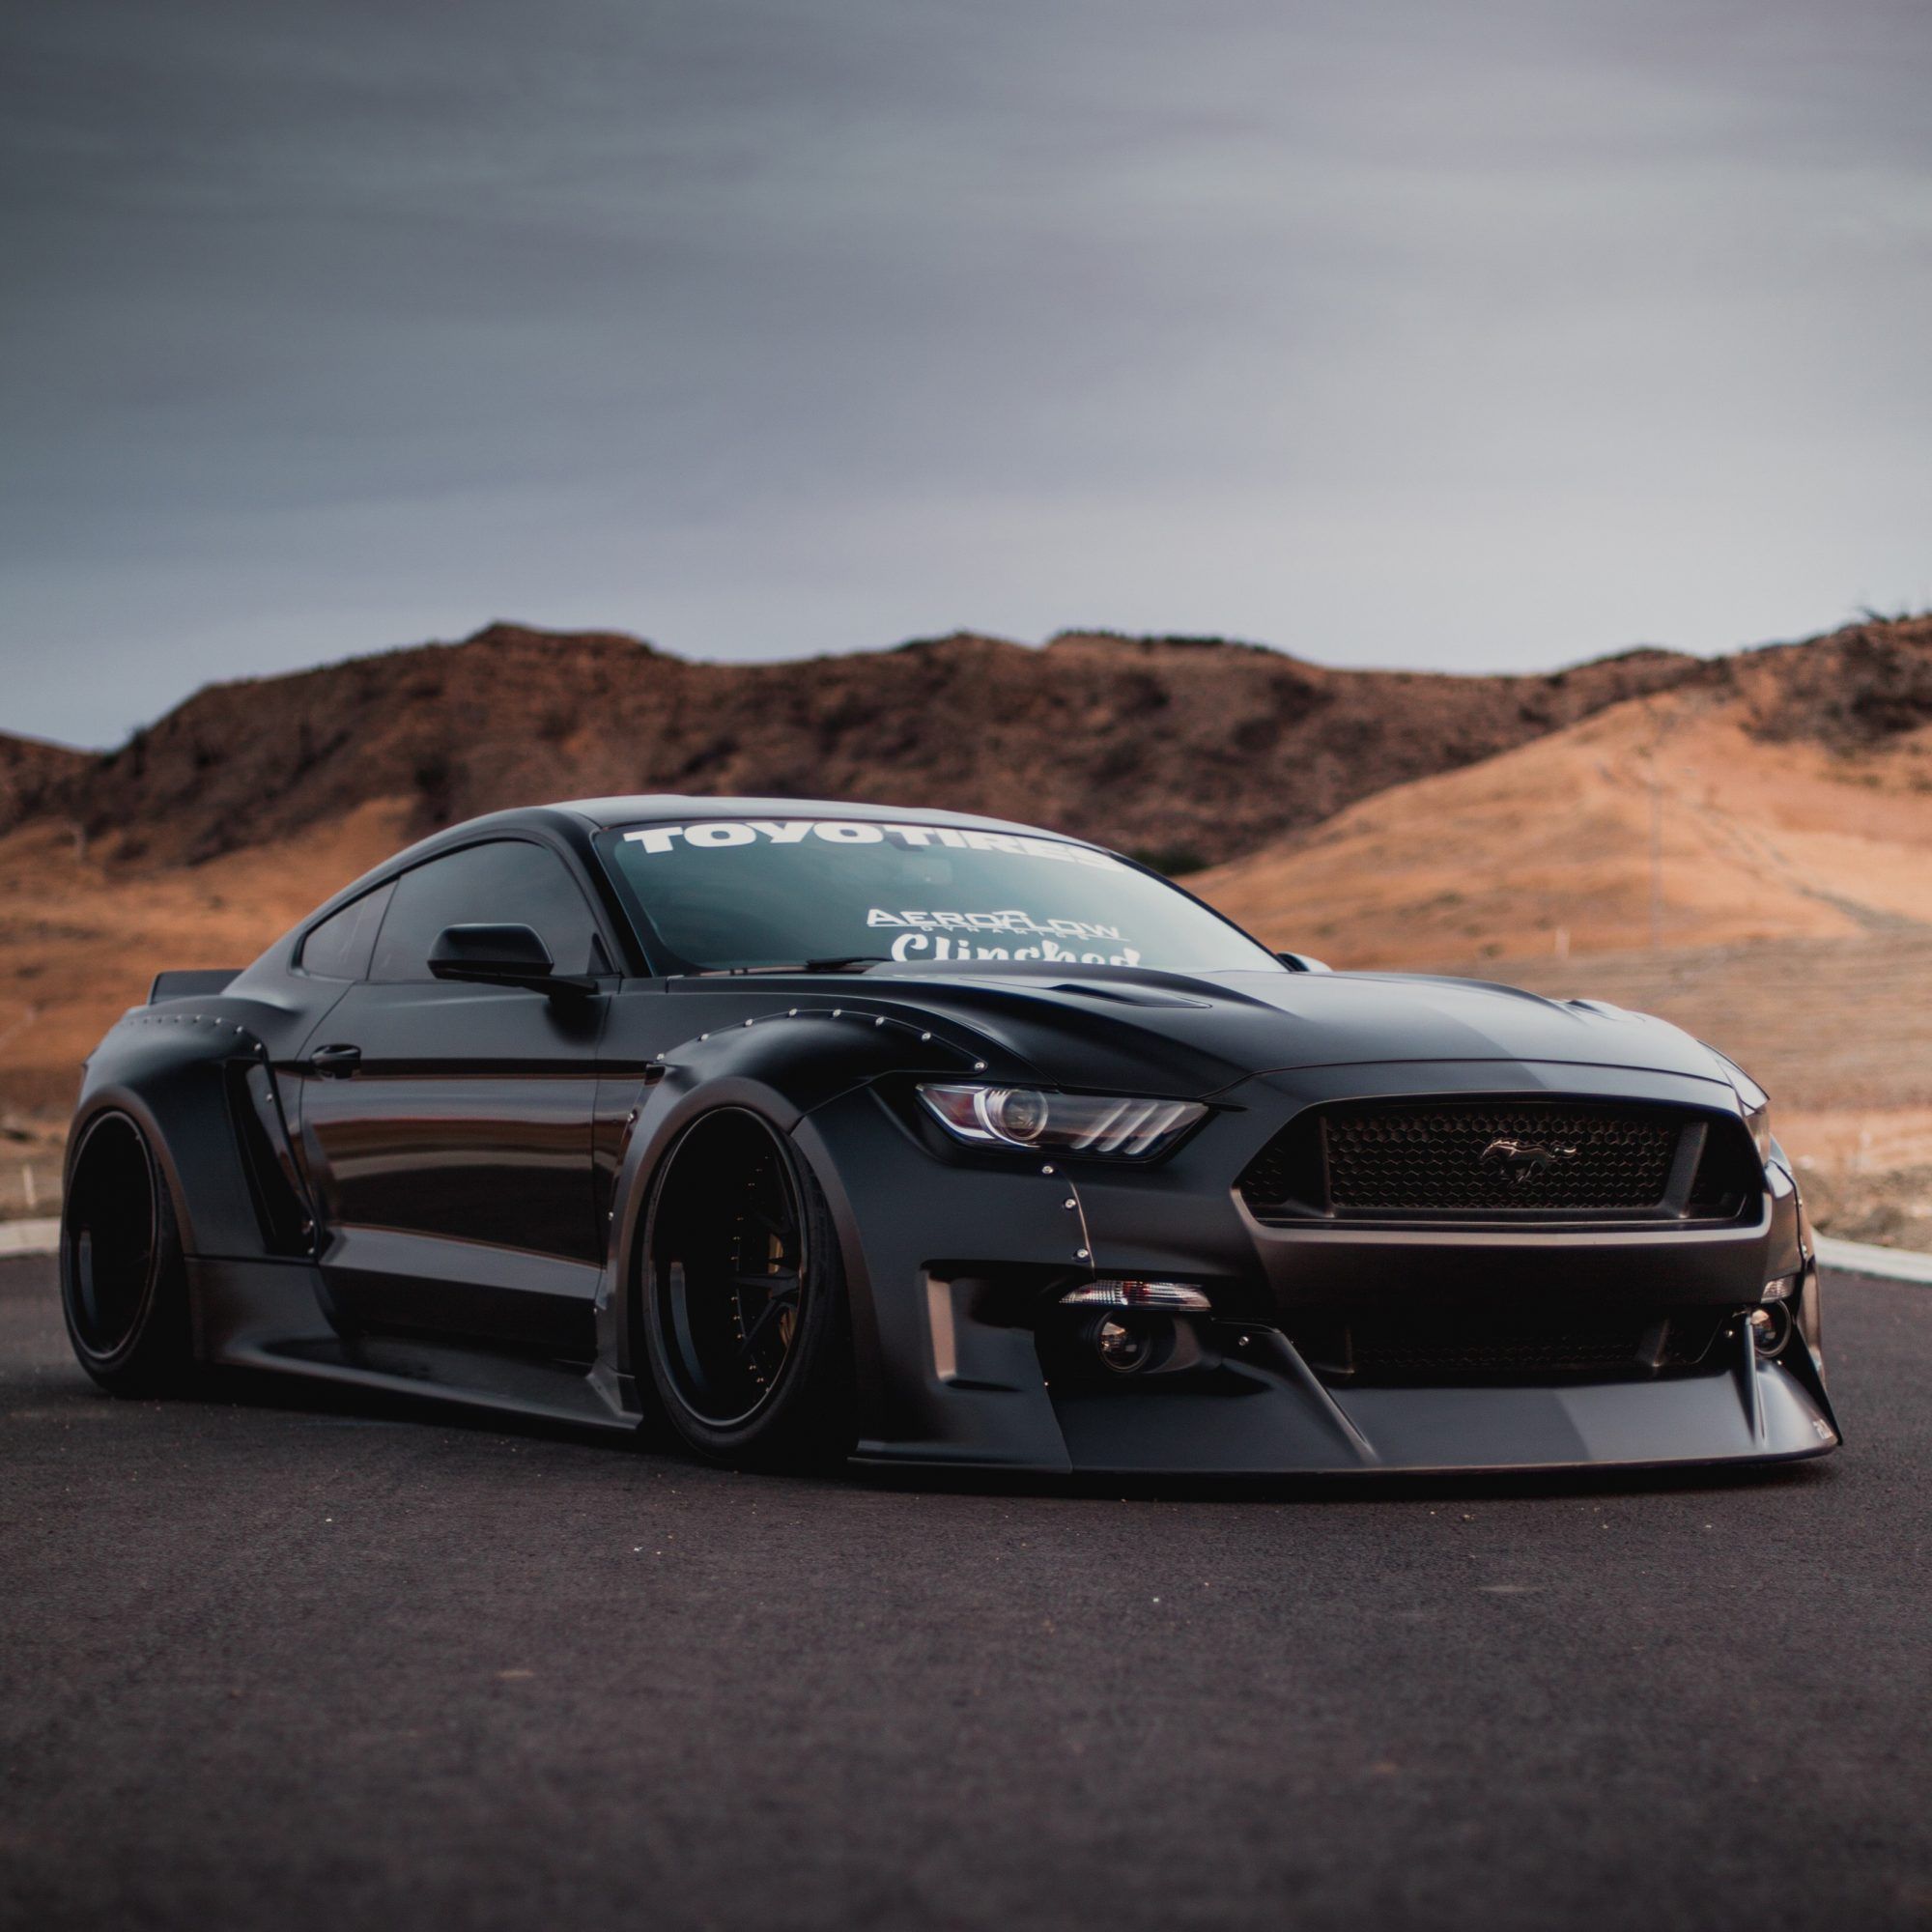 Ford Mustang widebody kit S550 wide body kit